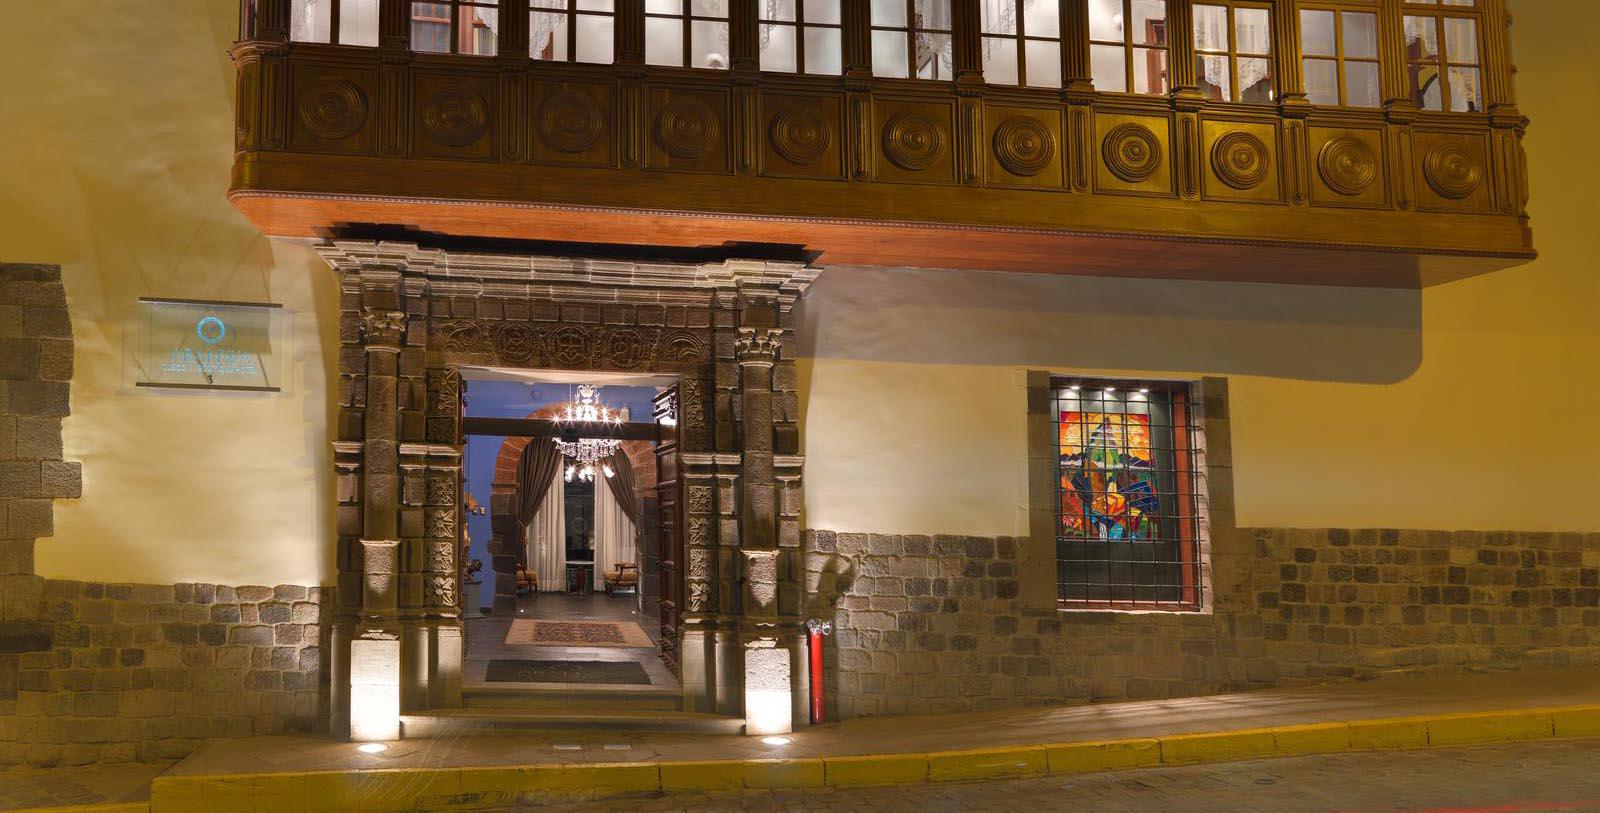 Image of hotel exterior front entrance Aranwa Cusco Boutique Hotel, 1560, Member of Historic Hotels Worldwide, in Cusco, Peru, Overview Video